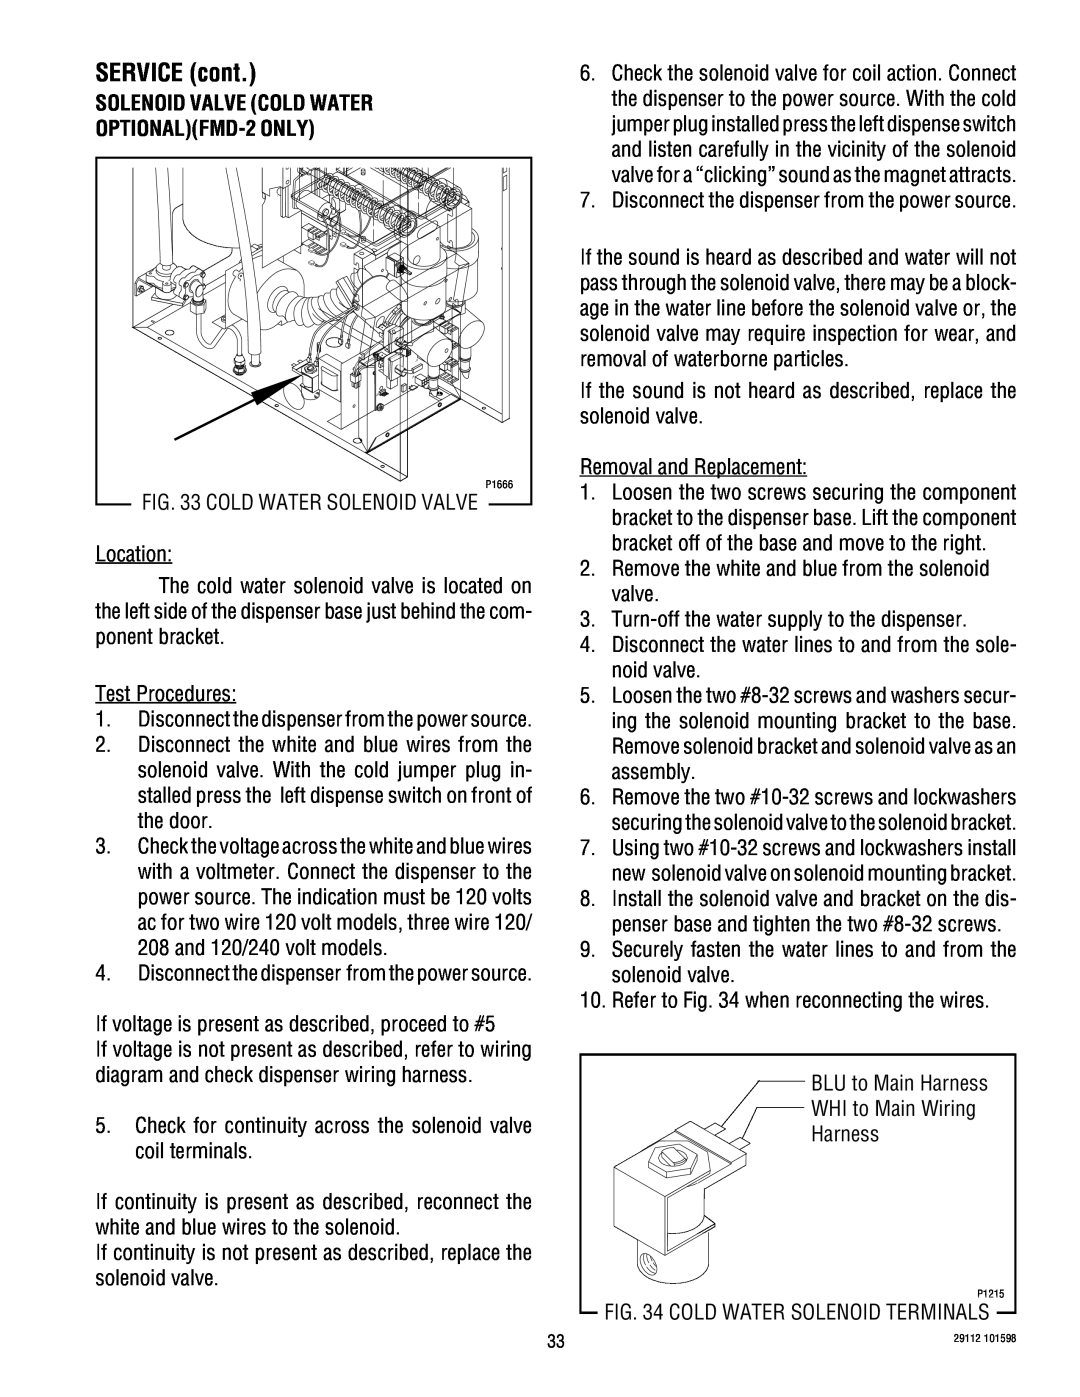 Bunn FMD-1 service manual SOLENOID VALVE COLD WATER OPTIONALFMD-2ONLY, SERVICE cont 